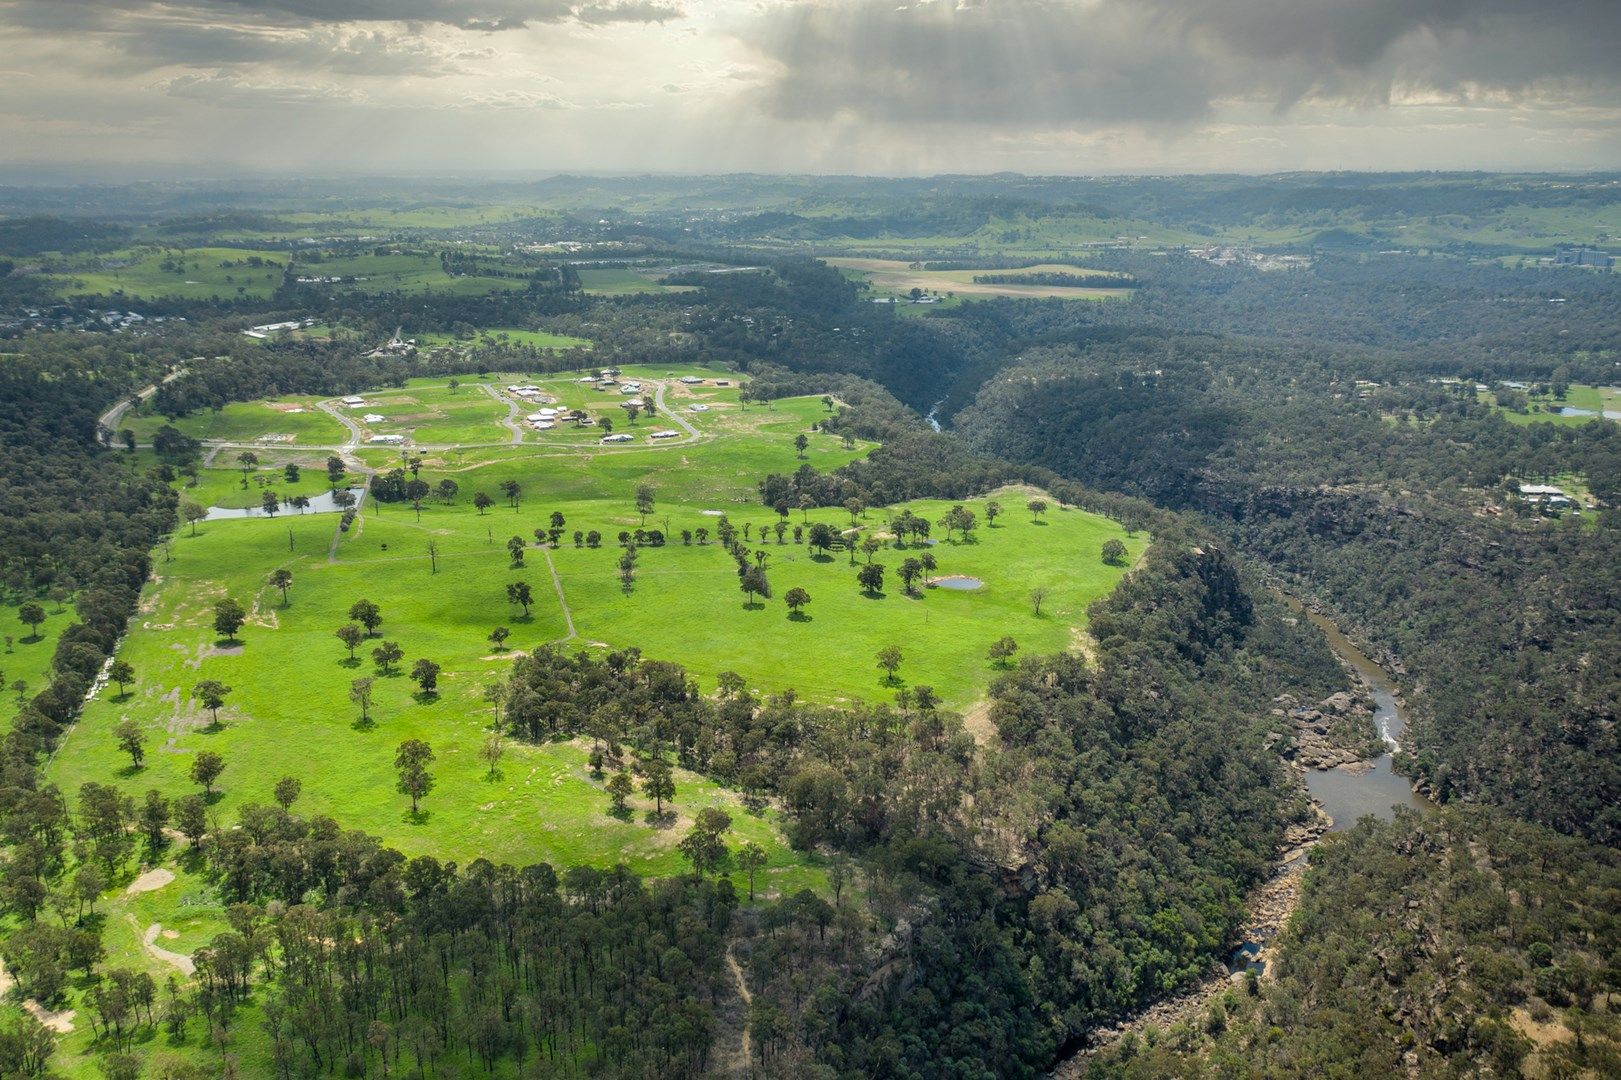 LOT 210 52 The Acres Way | The Acres, Tahmoor NSW 2573, Image 1